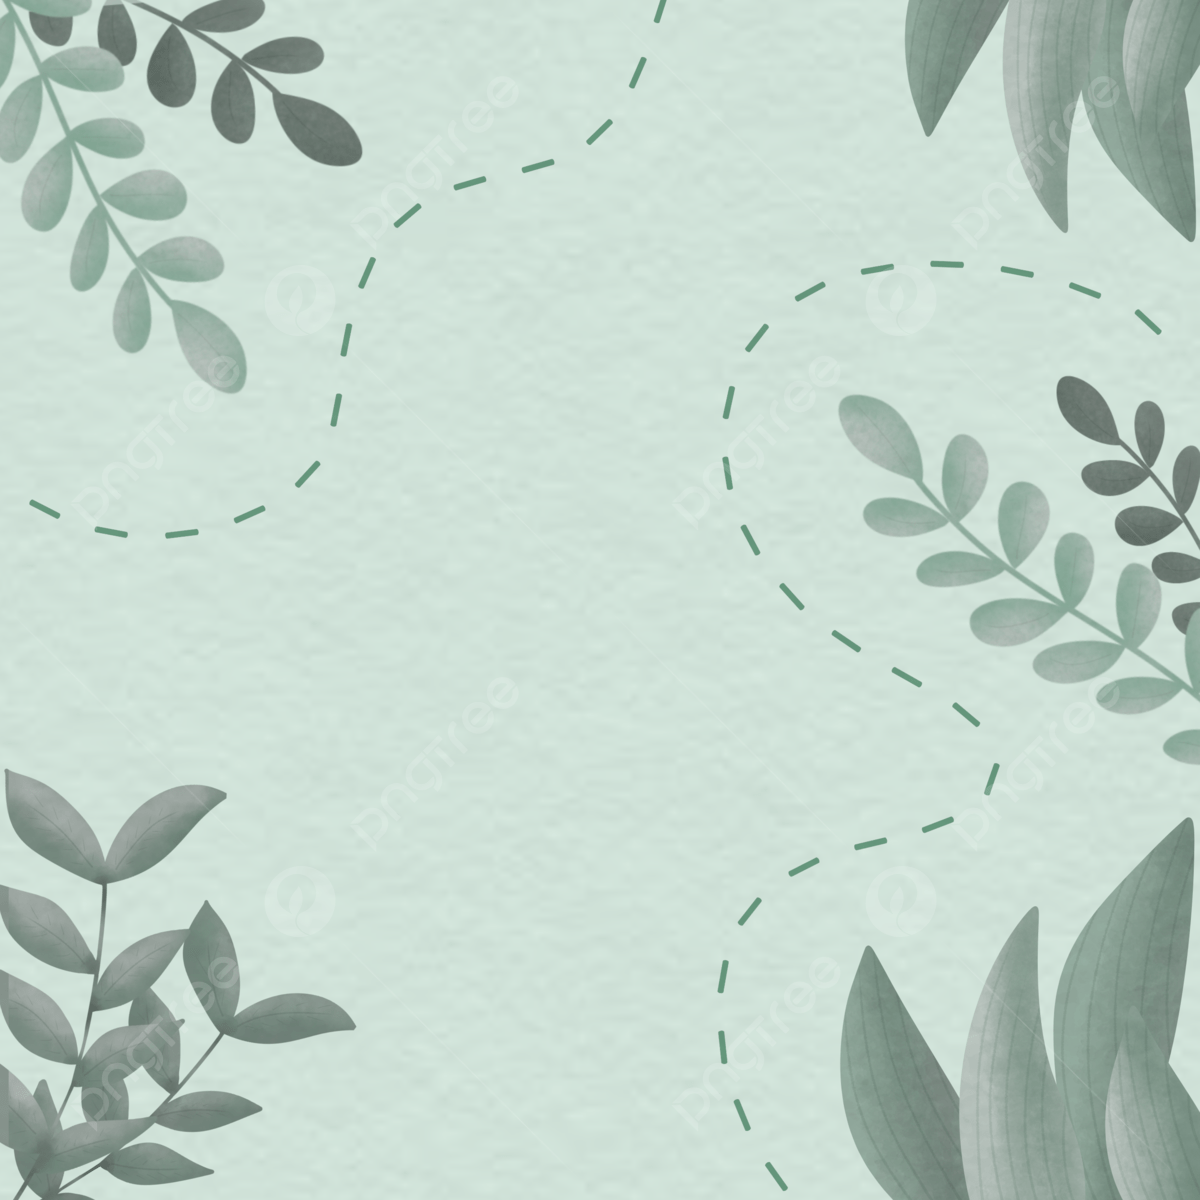 A green leafy background with a white border - Mint green